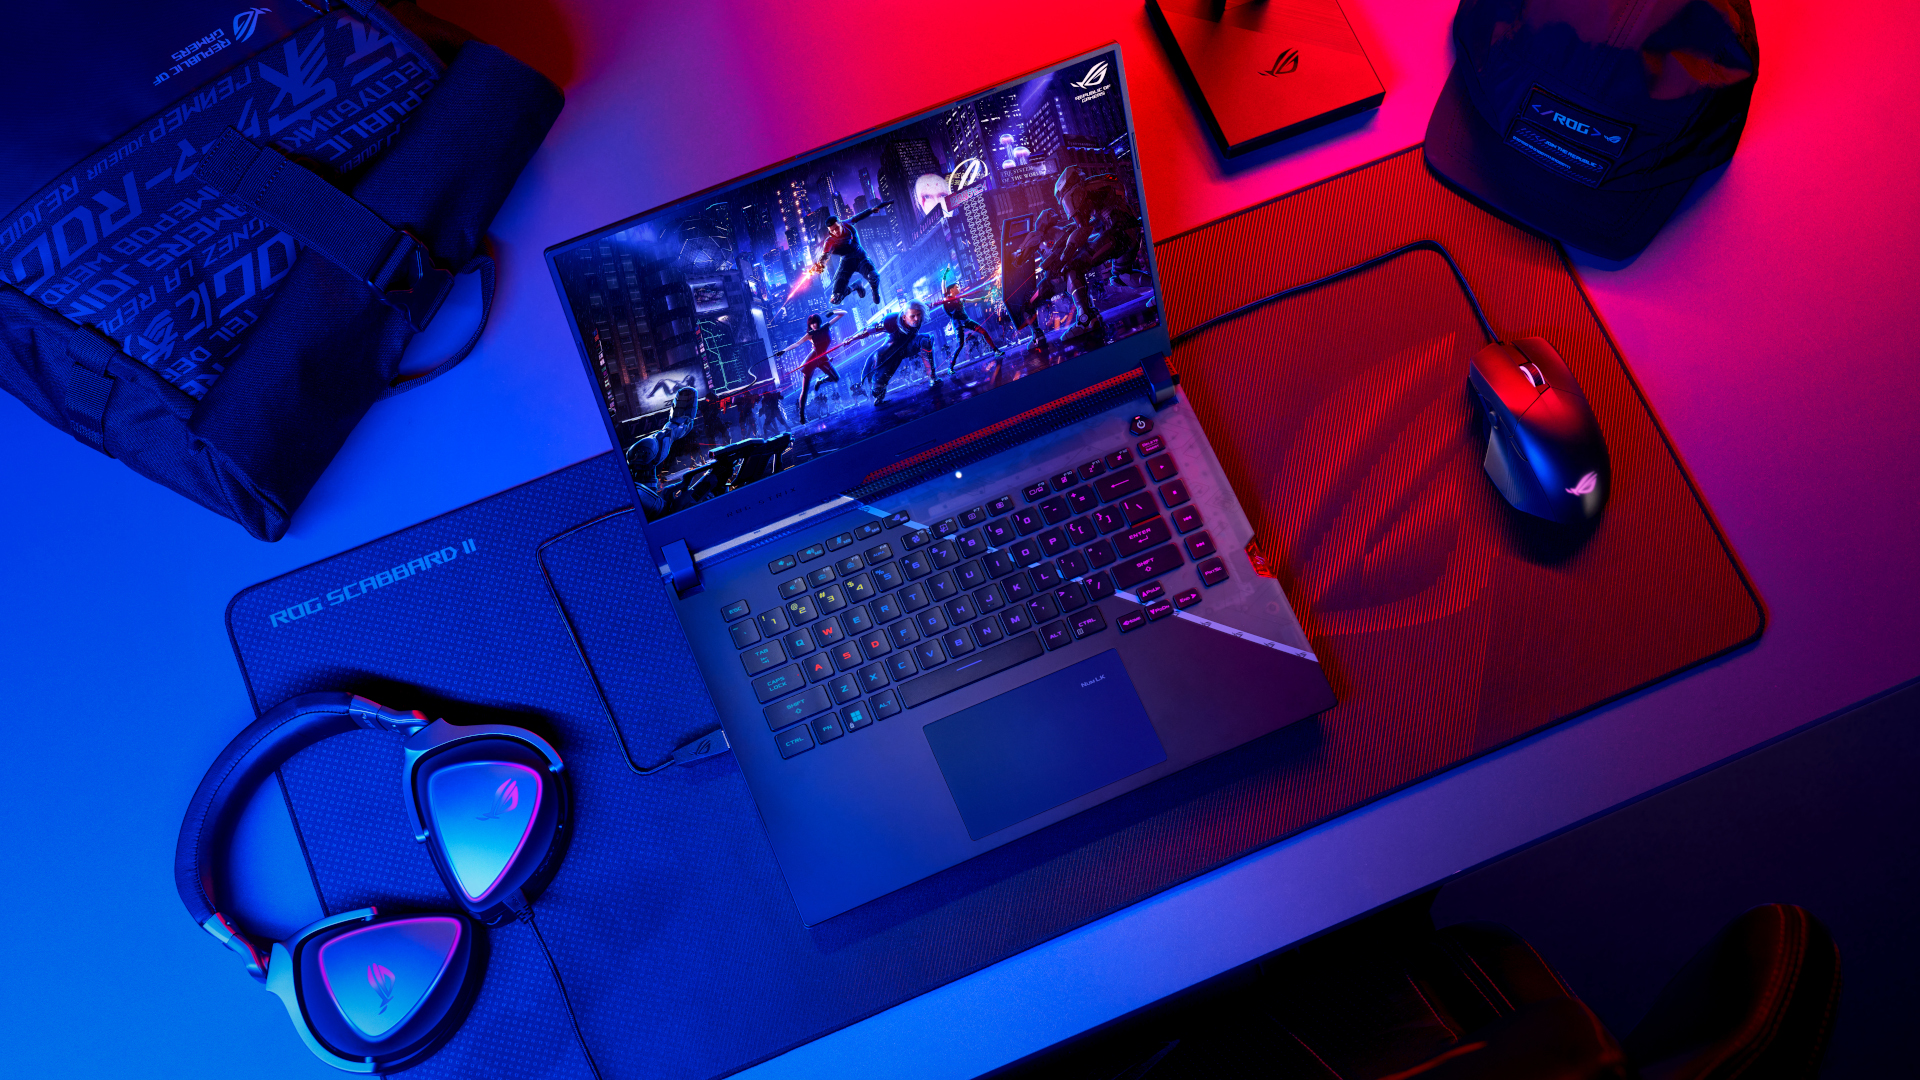 The new Asus ROG Strix Scar could be the ultimate esports enthusiast gaming laptop | PCGamesN